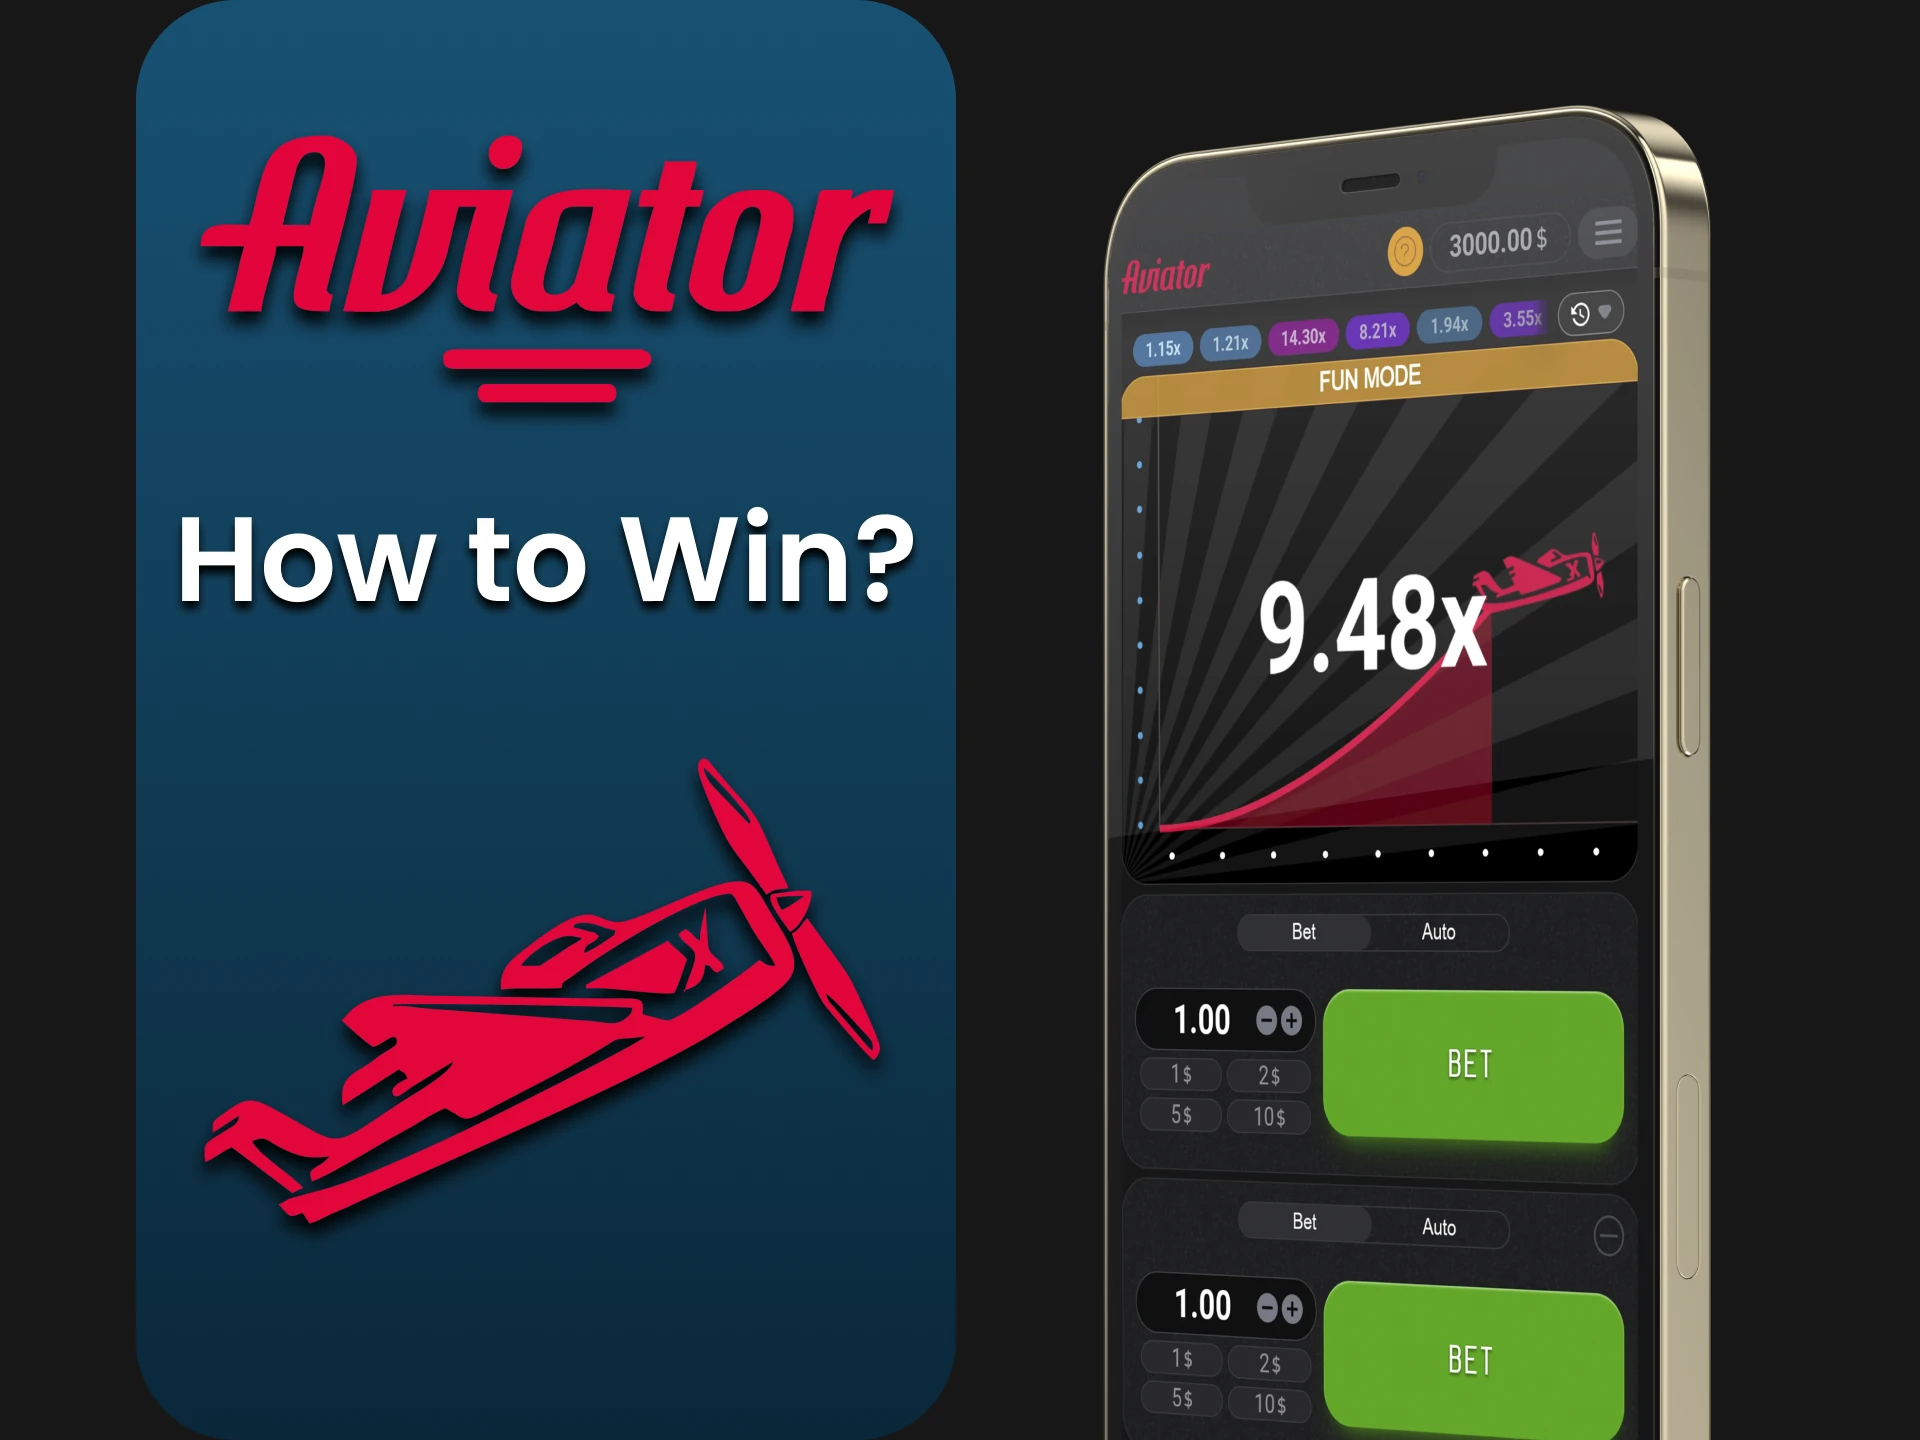 We will tell you about tips for winning the Aviator game.